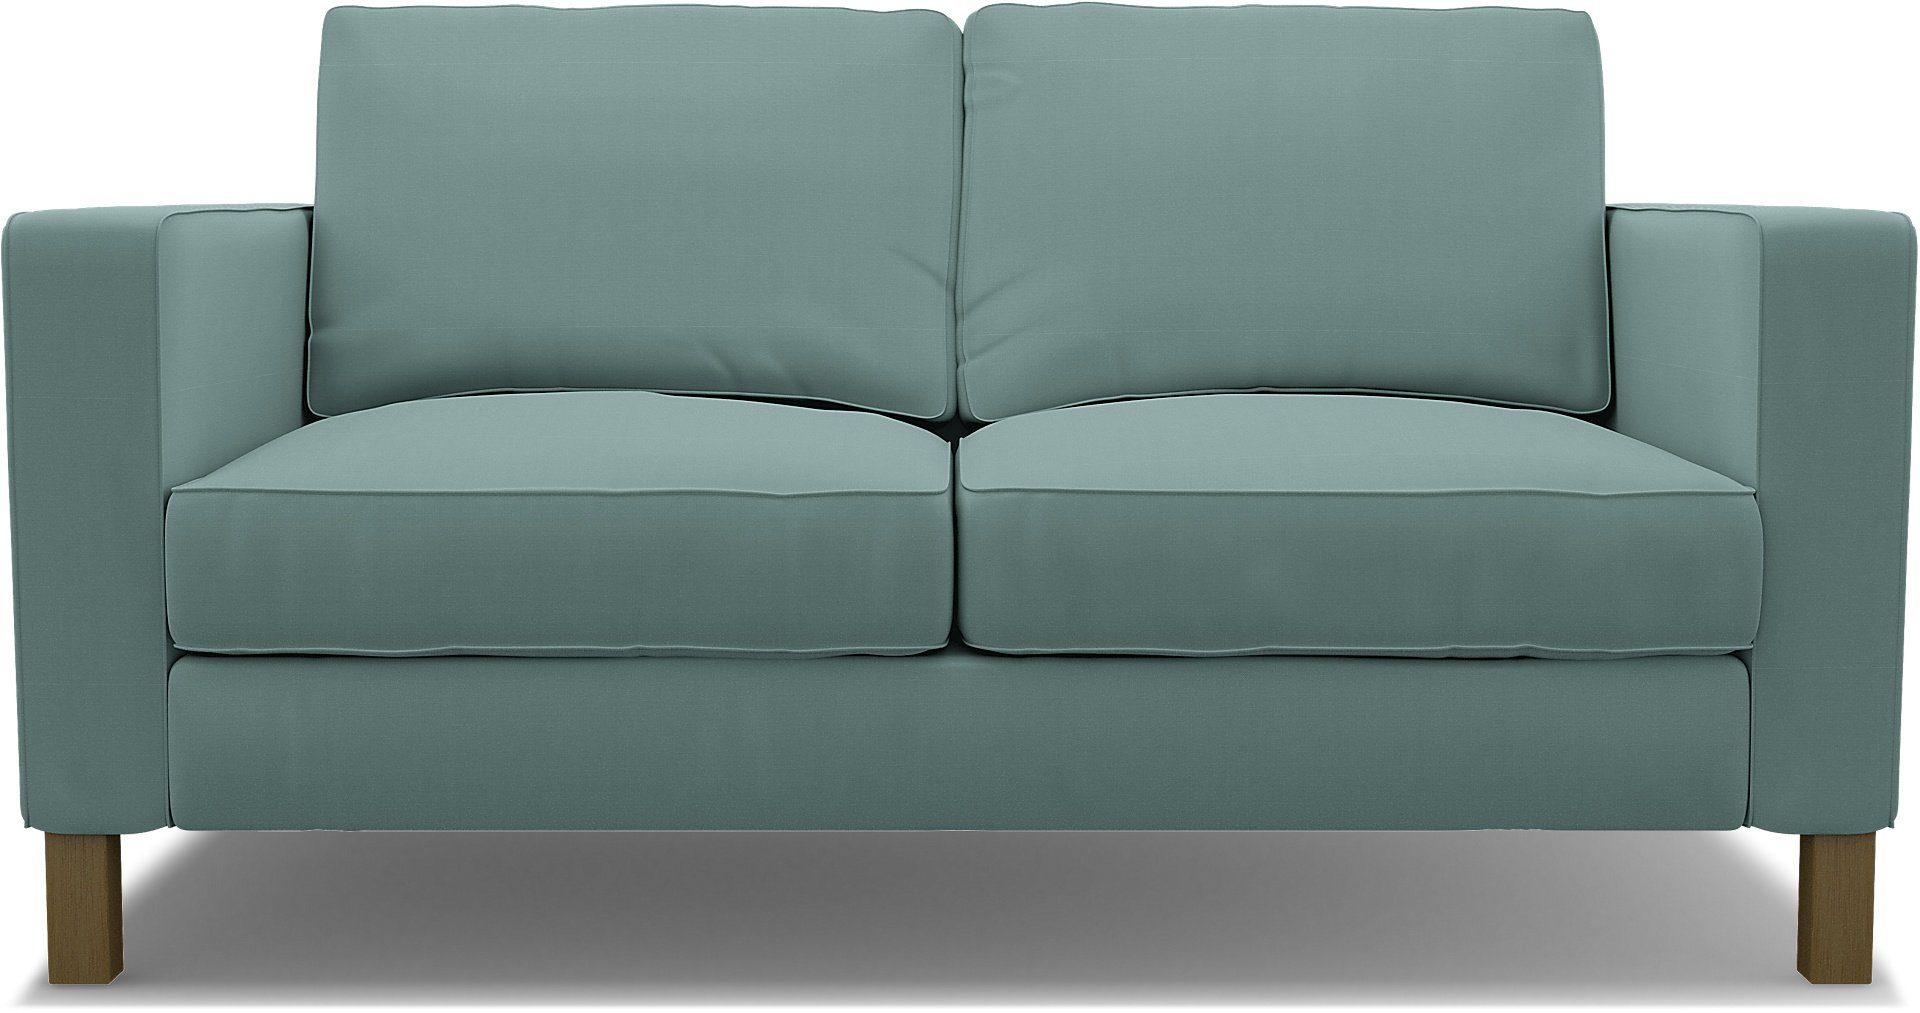 IKEA - Karlstad 2 Seater Sofa Cover, Mineral Blue, Cotton - Bemz